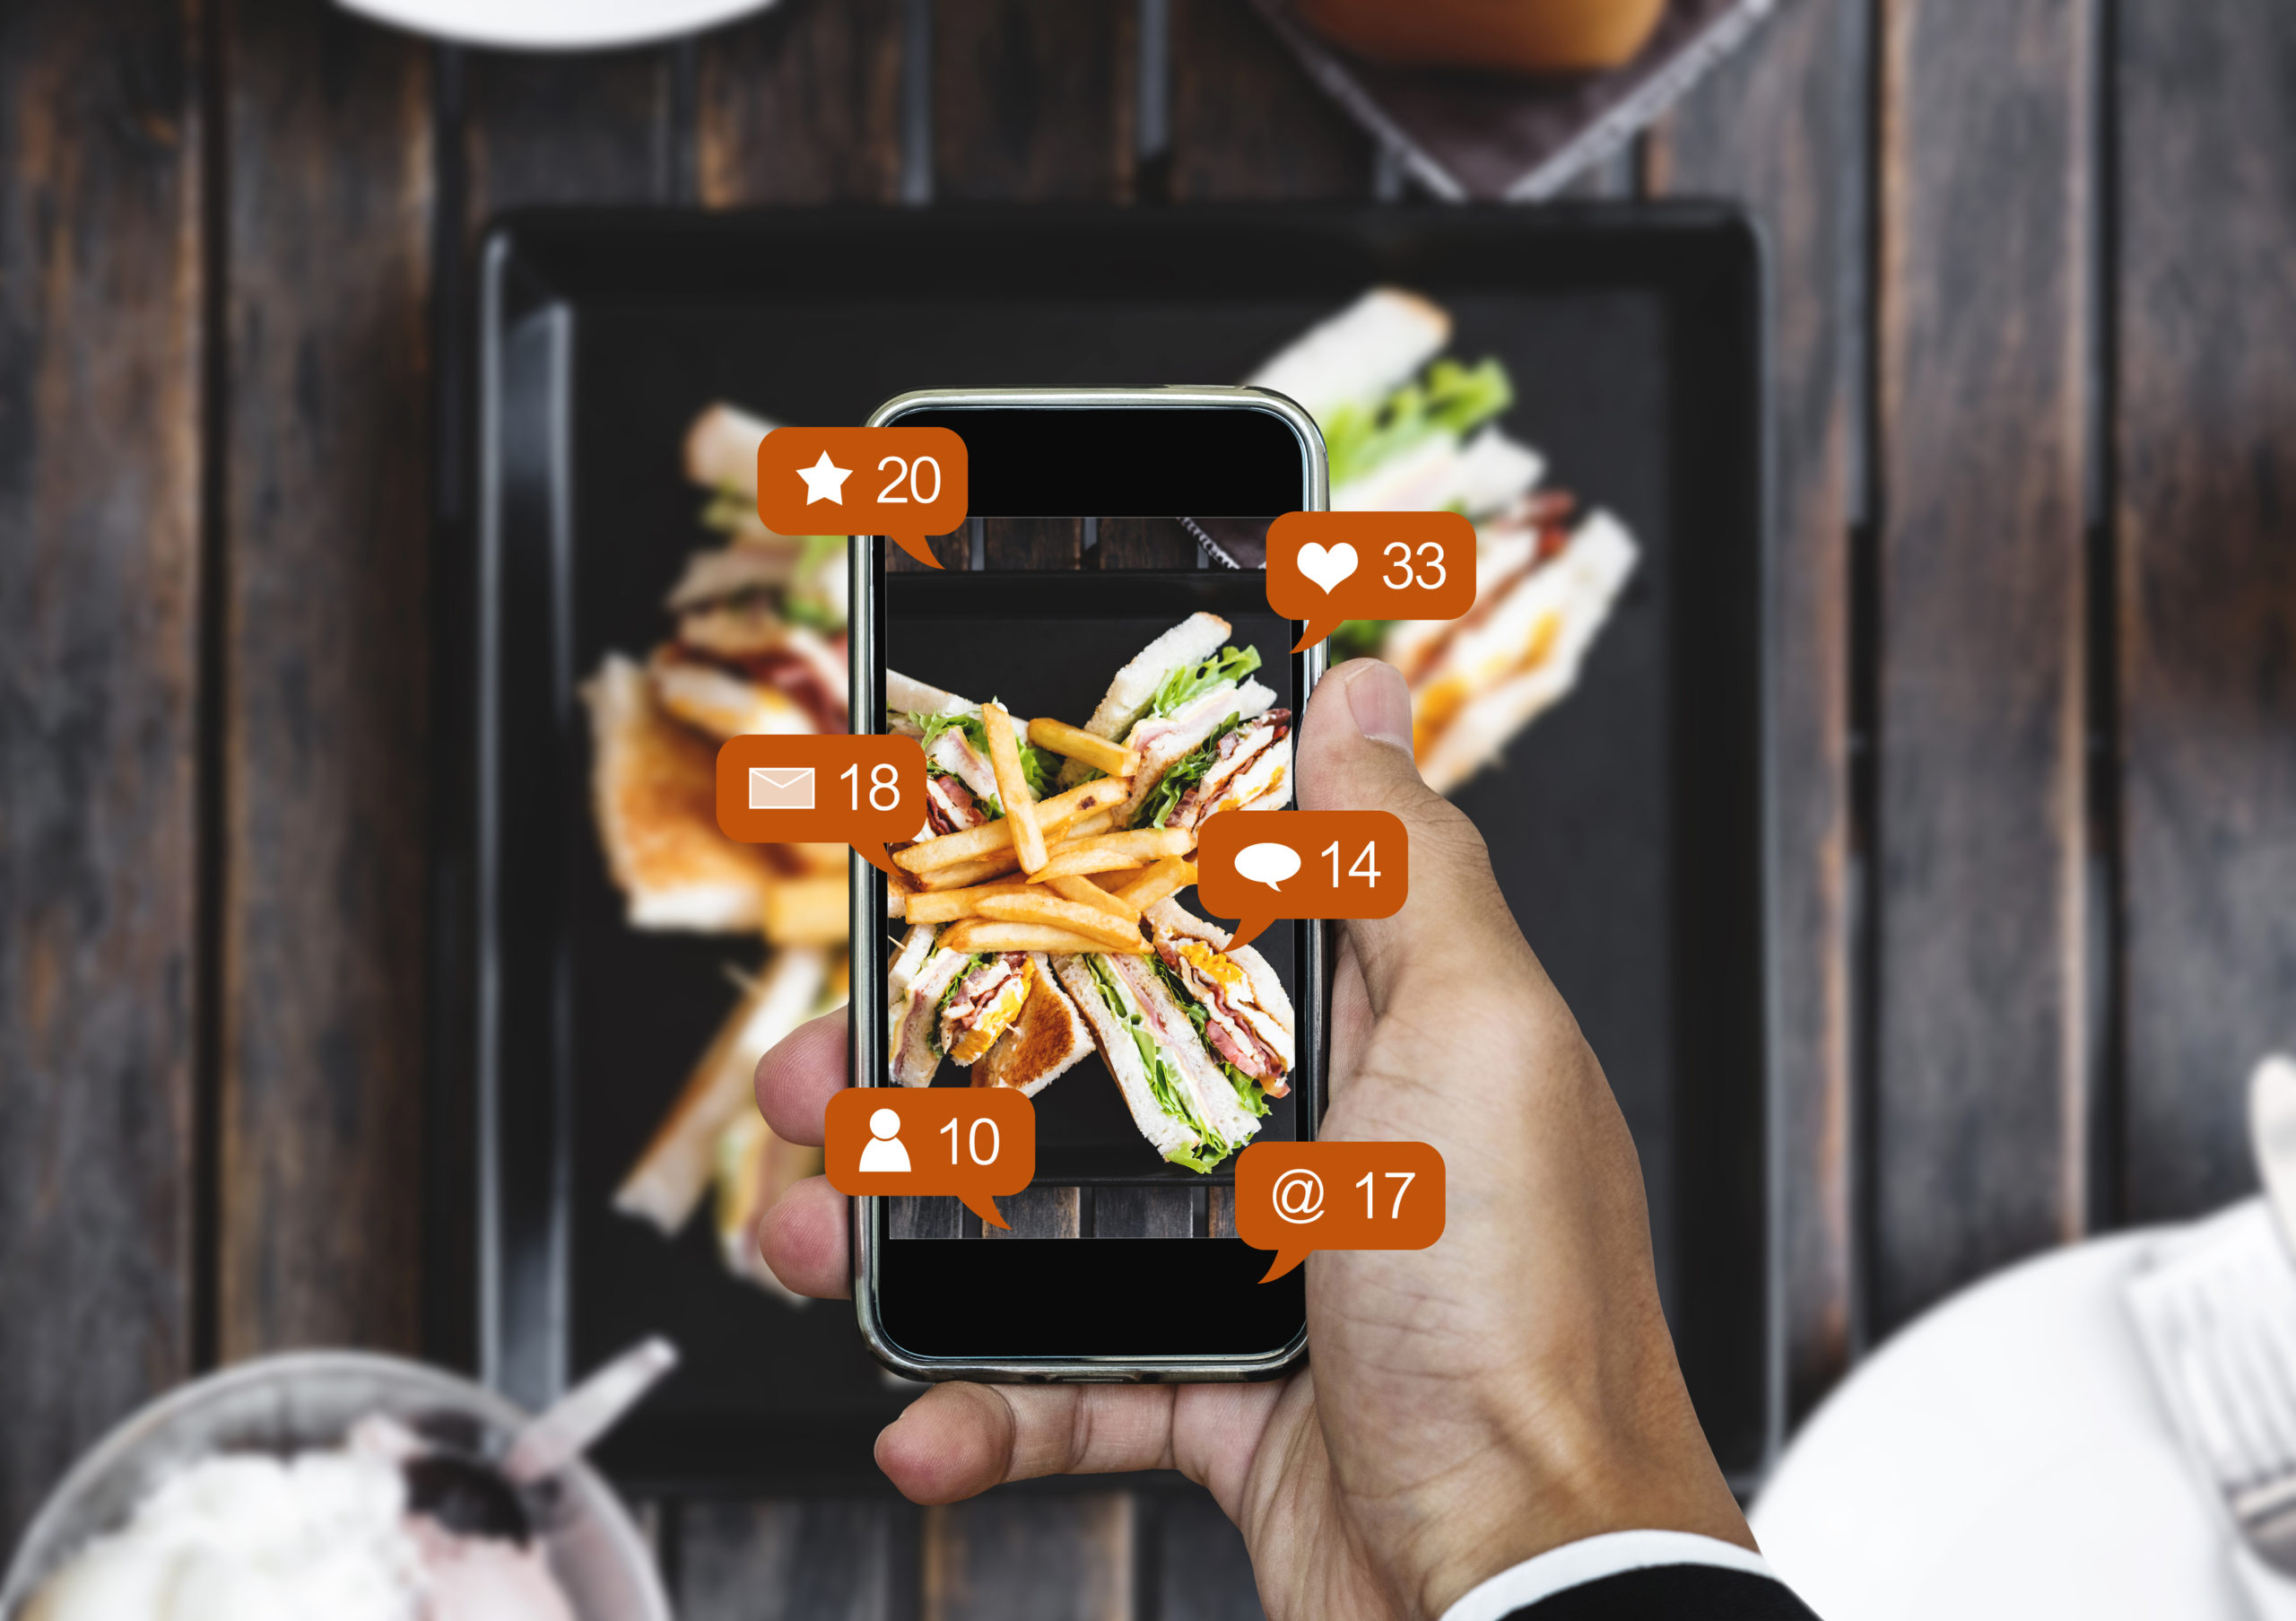 Restaurant food social media concept. Person taking a picture of their meal with social media icons around the camera screen